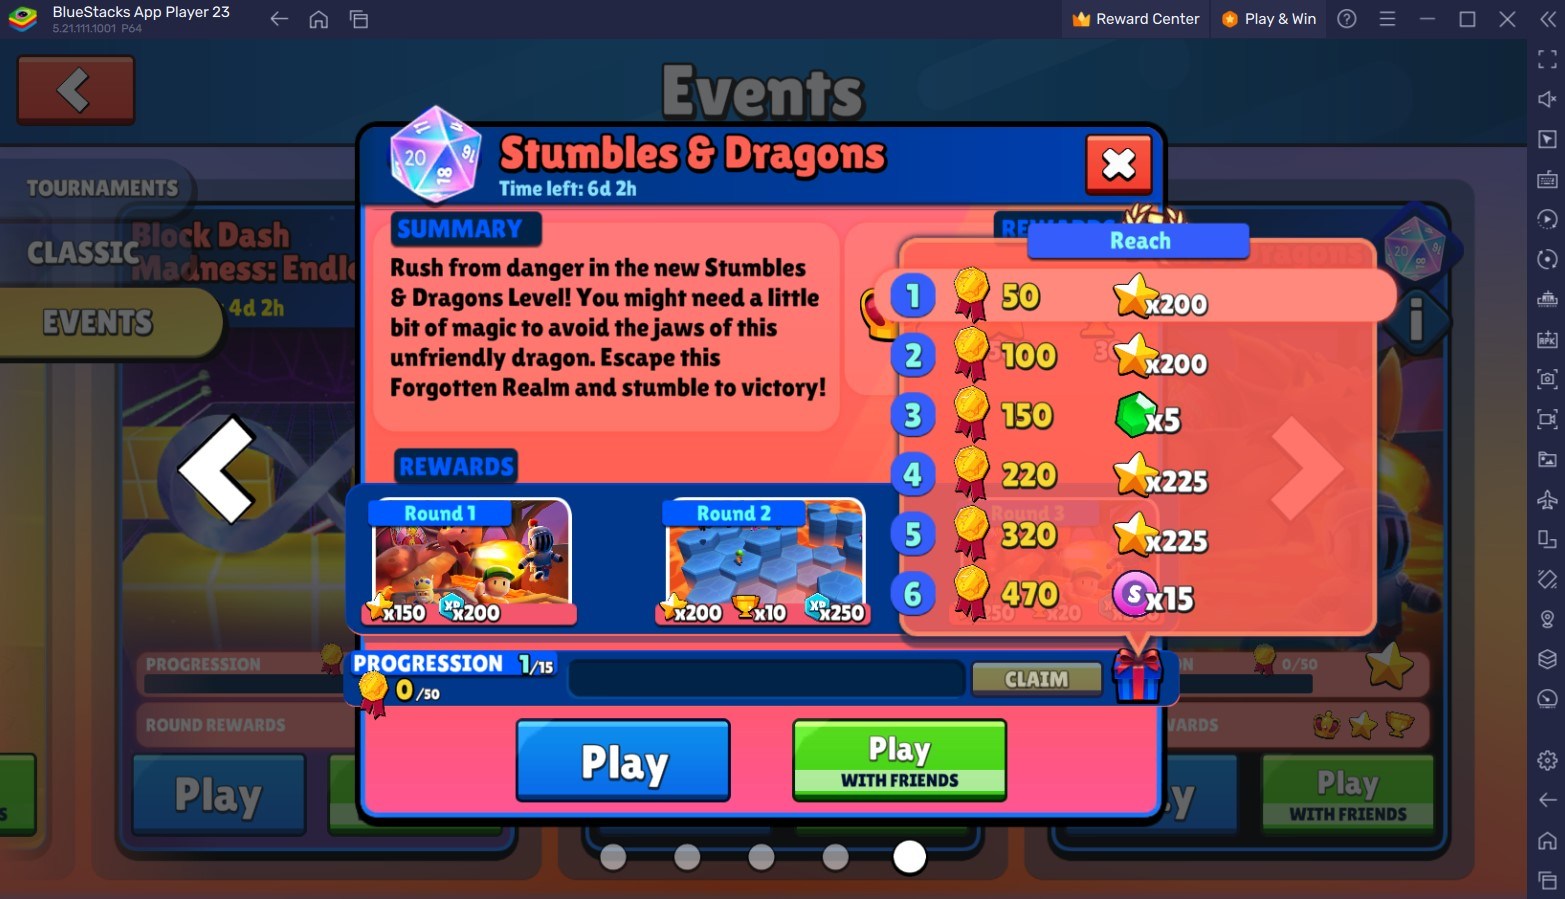 Stumble Guys Update 0.68 – Dungeon & Dragons Collaboration, New Maps, and New Level Mechanics